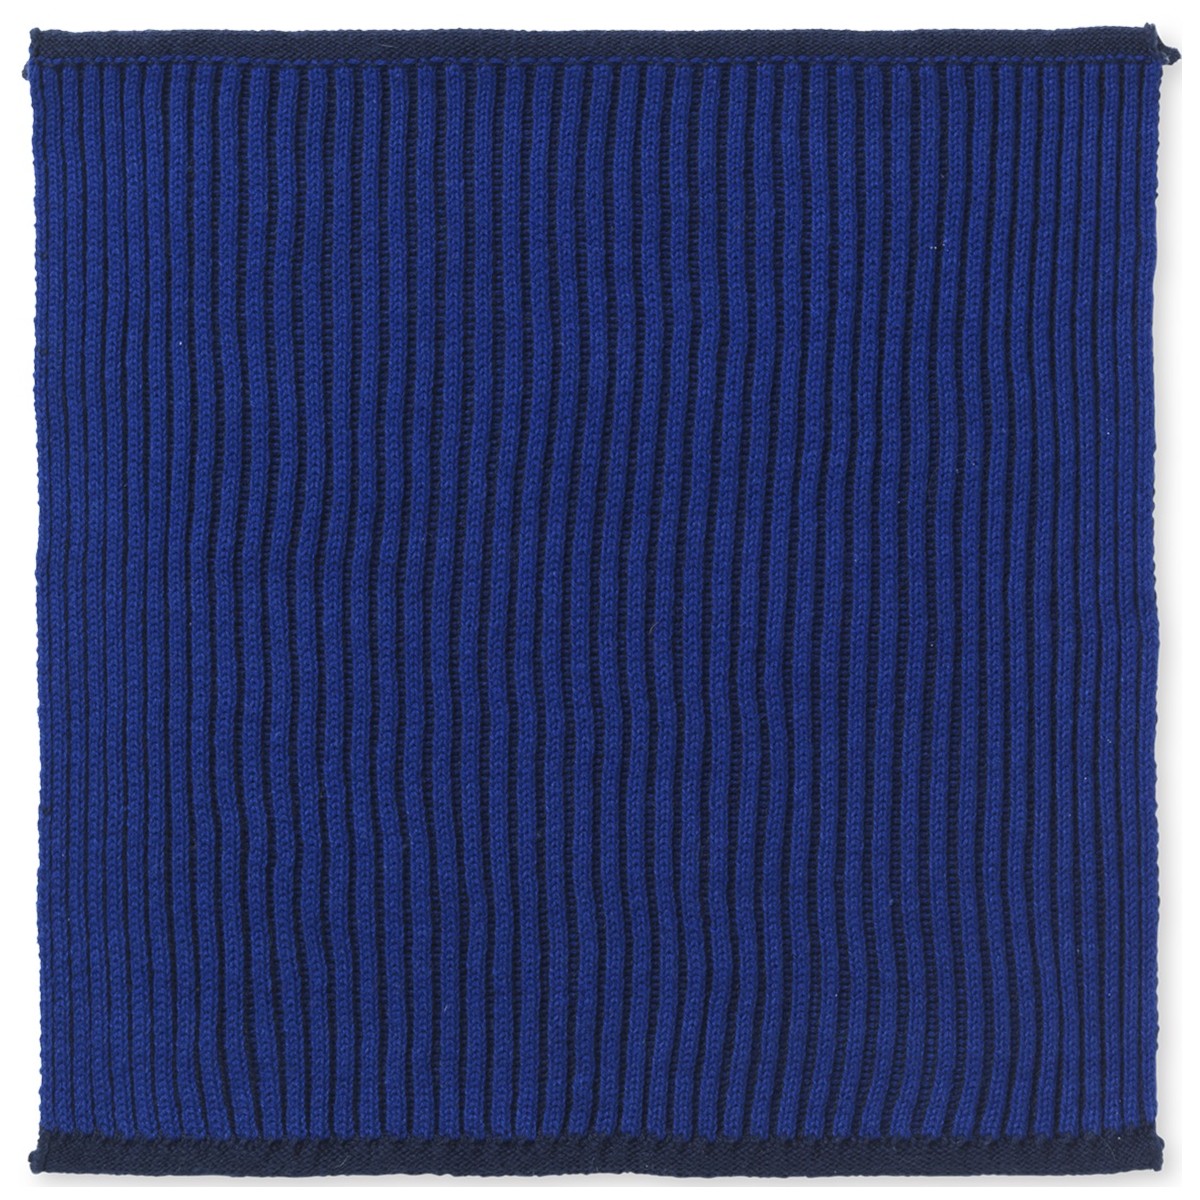 SOLD OUT Twofold dish cloth - blue/blue navy